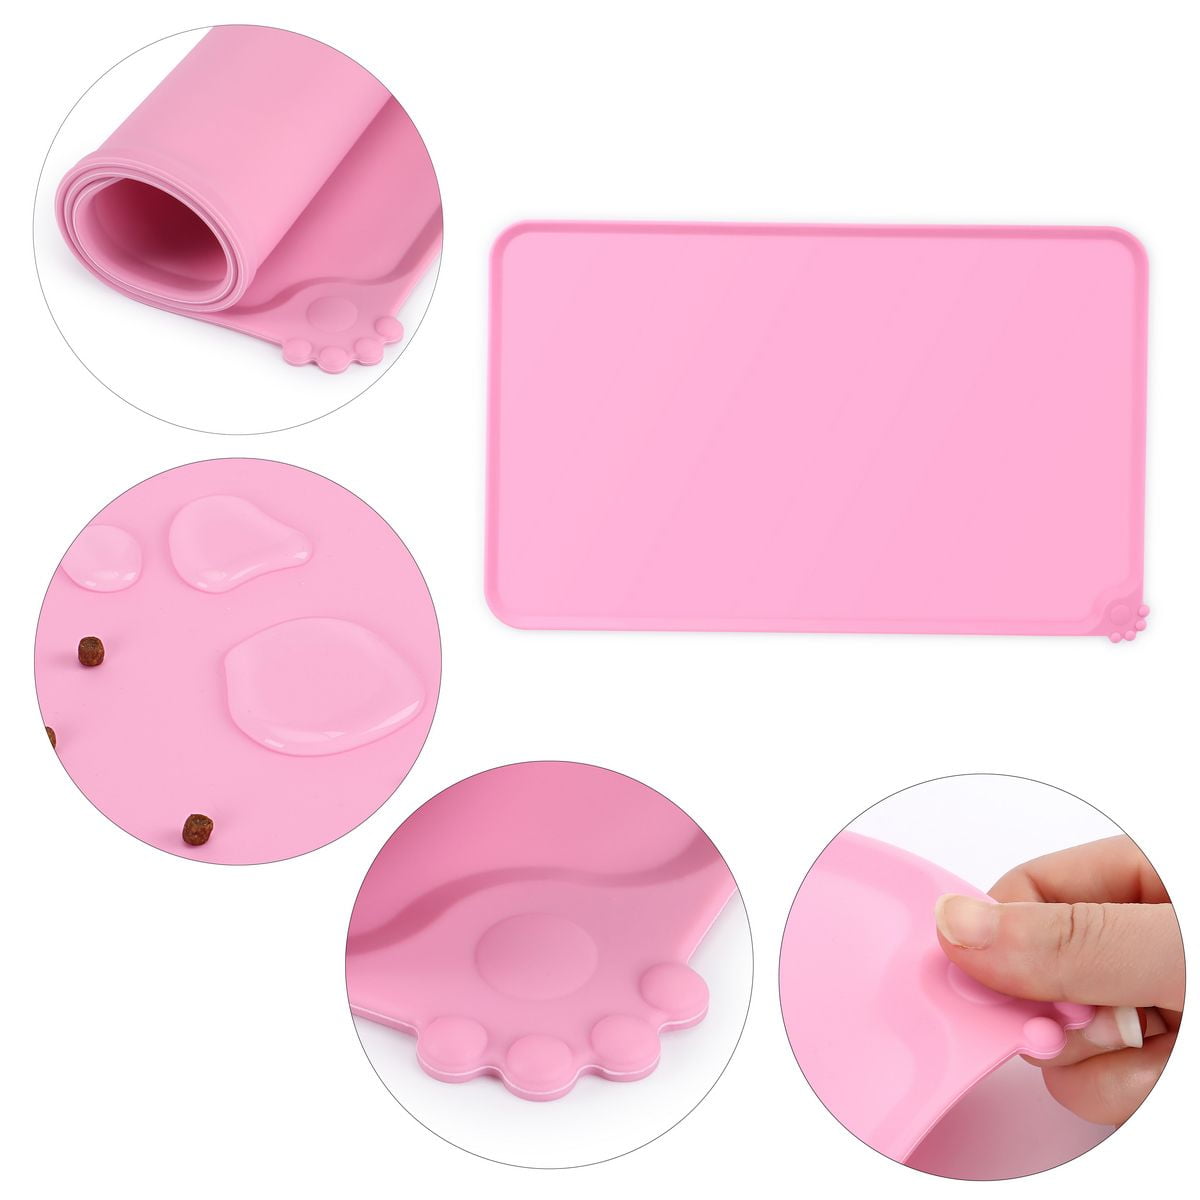 Senmipy Silicone Dog Food Mat - Waterproof Dog Bowl Mats for Food and Water  Bowls, Raised Edges Non-Slip Cat Food Mat, BPA Free Pet Mats for Dog Bowls ( Large, Pink) price in